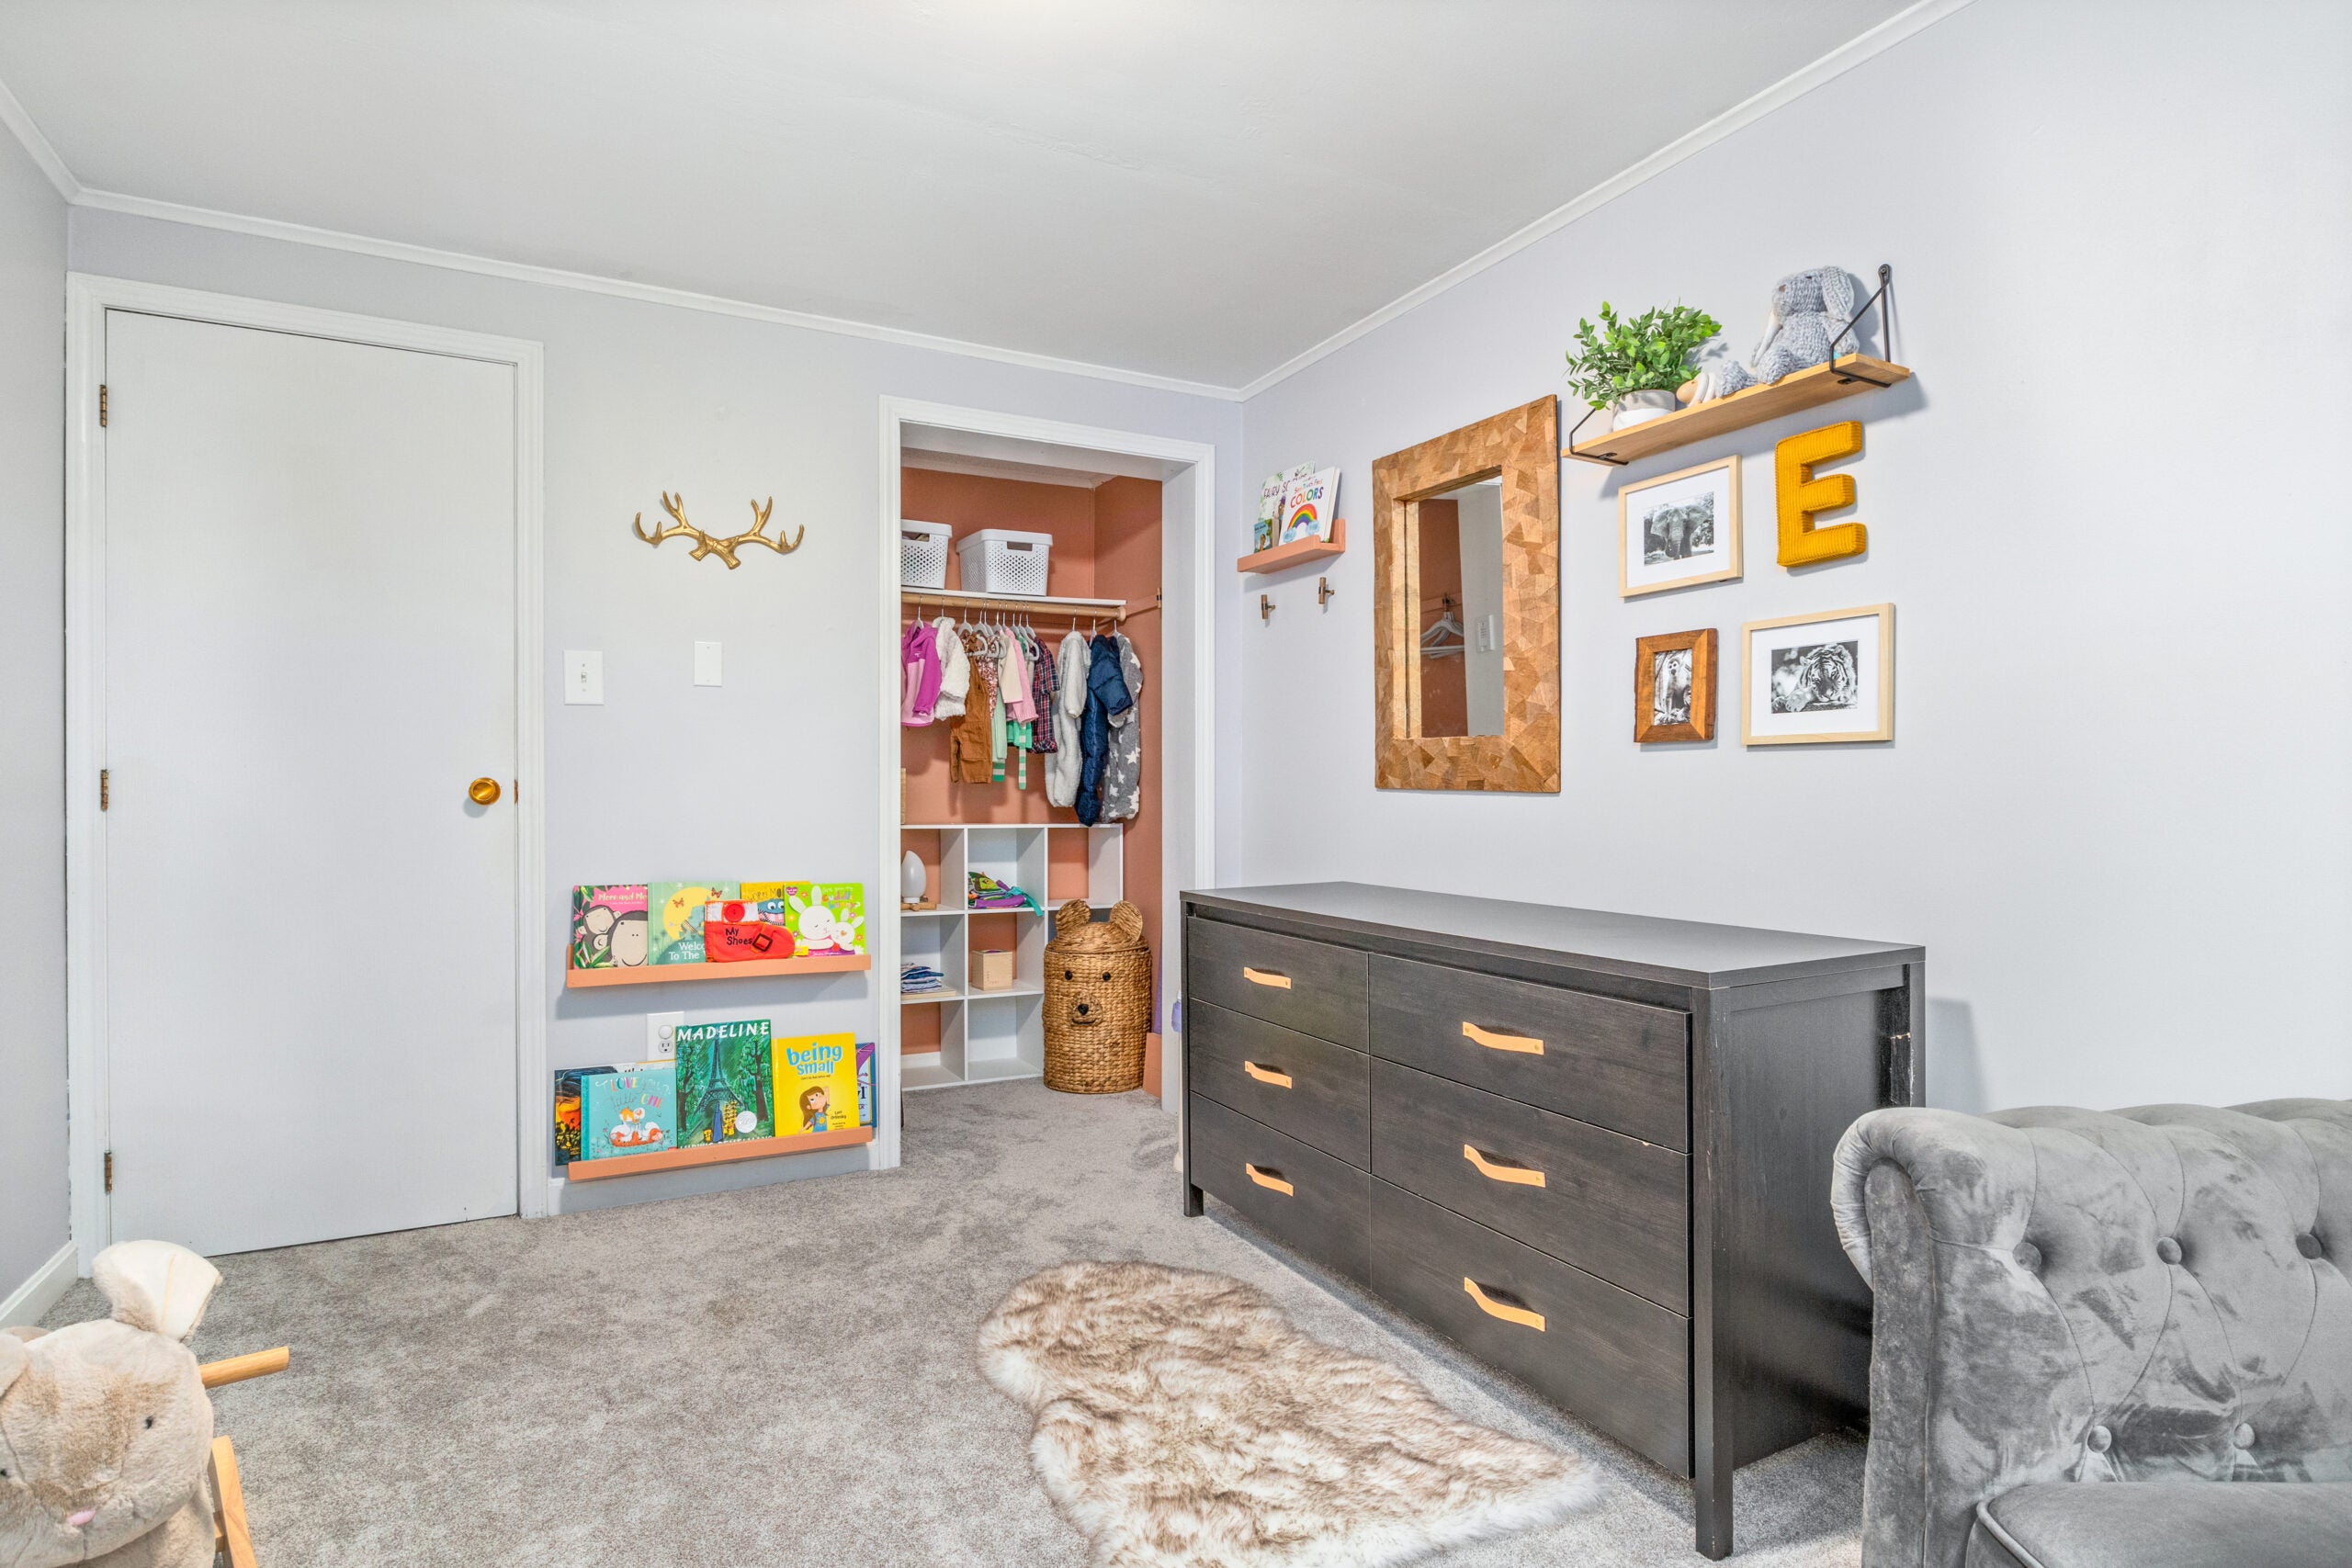 A bedroom with gray carpeting, a orange closet without a door, toddler clothes and toys, and a six-drawer dresser.